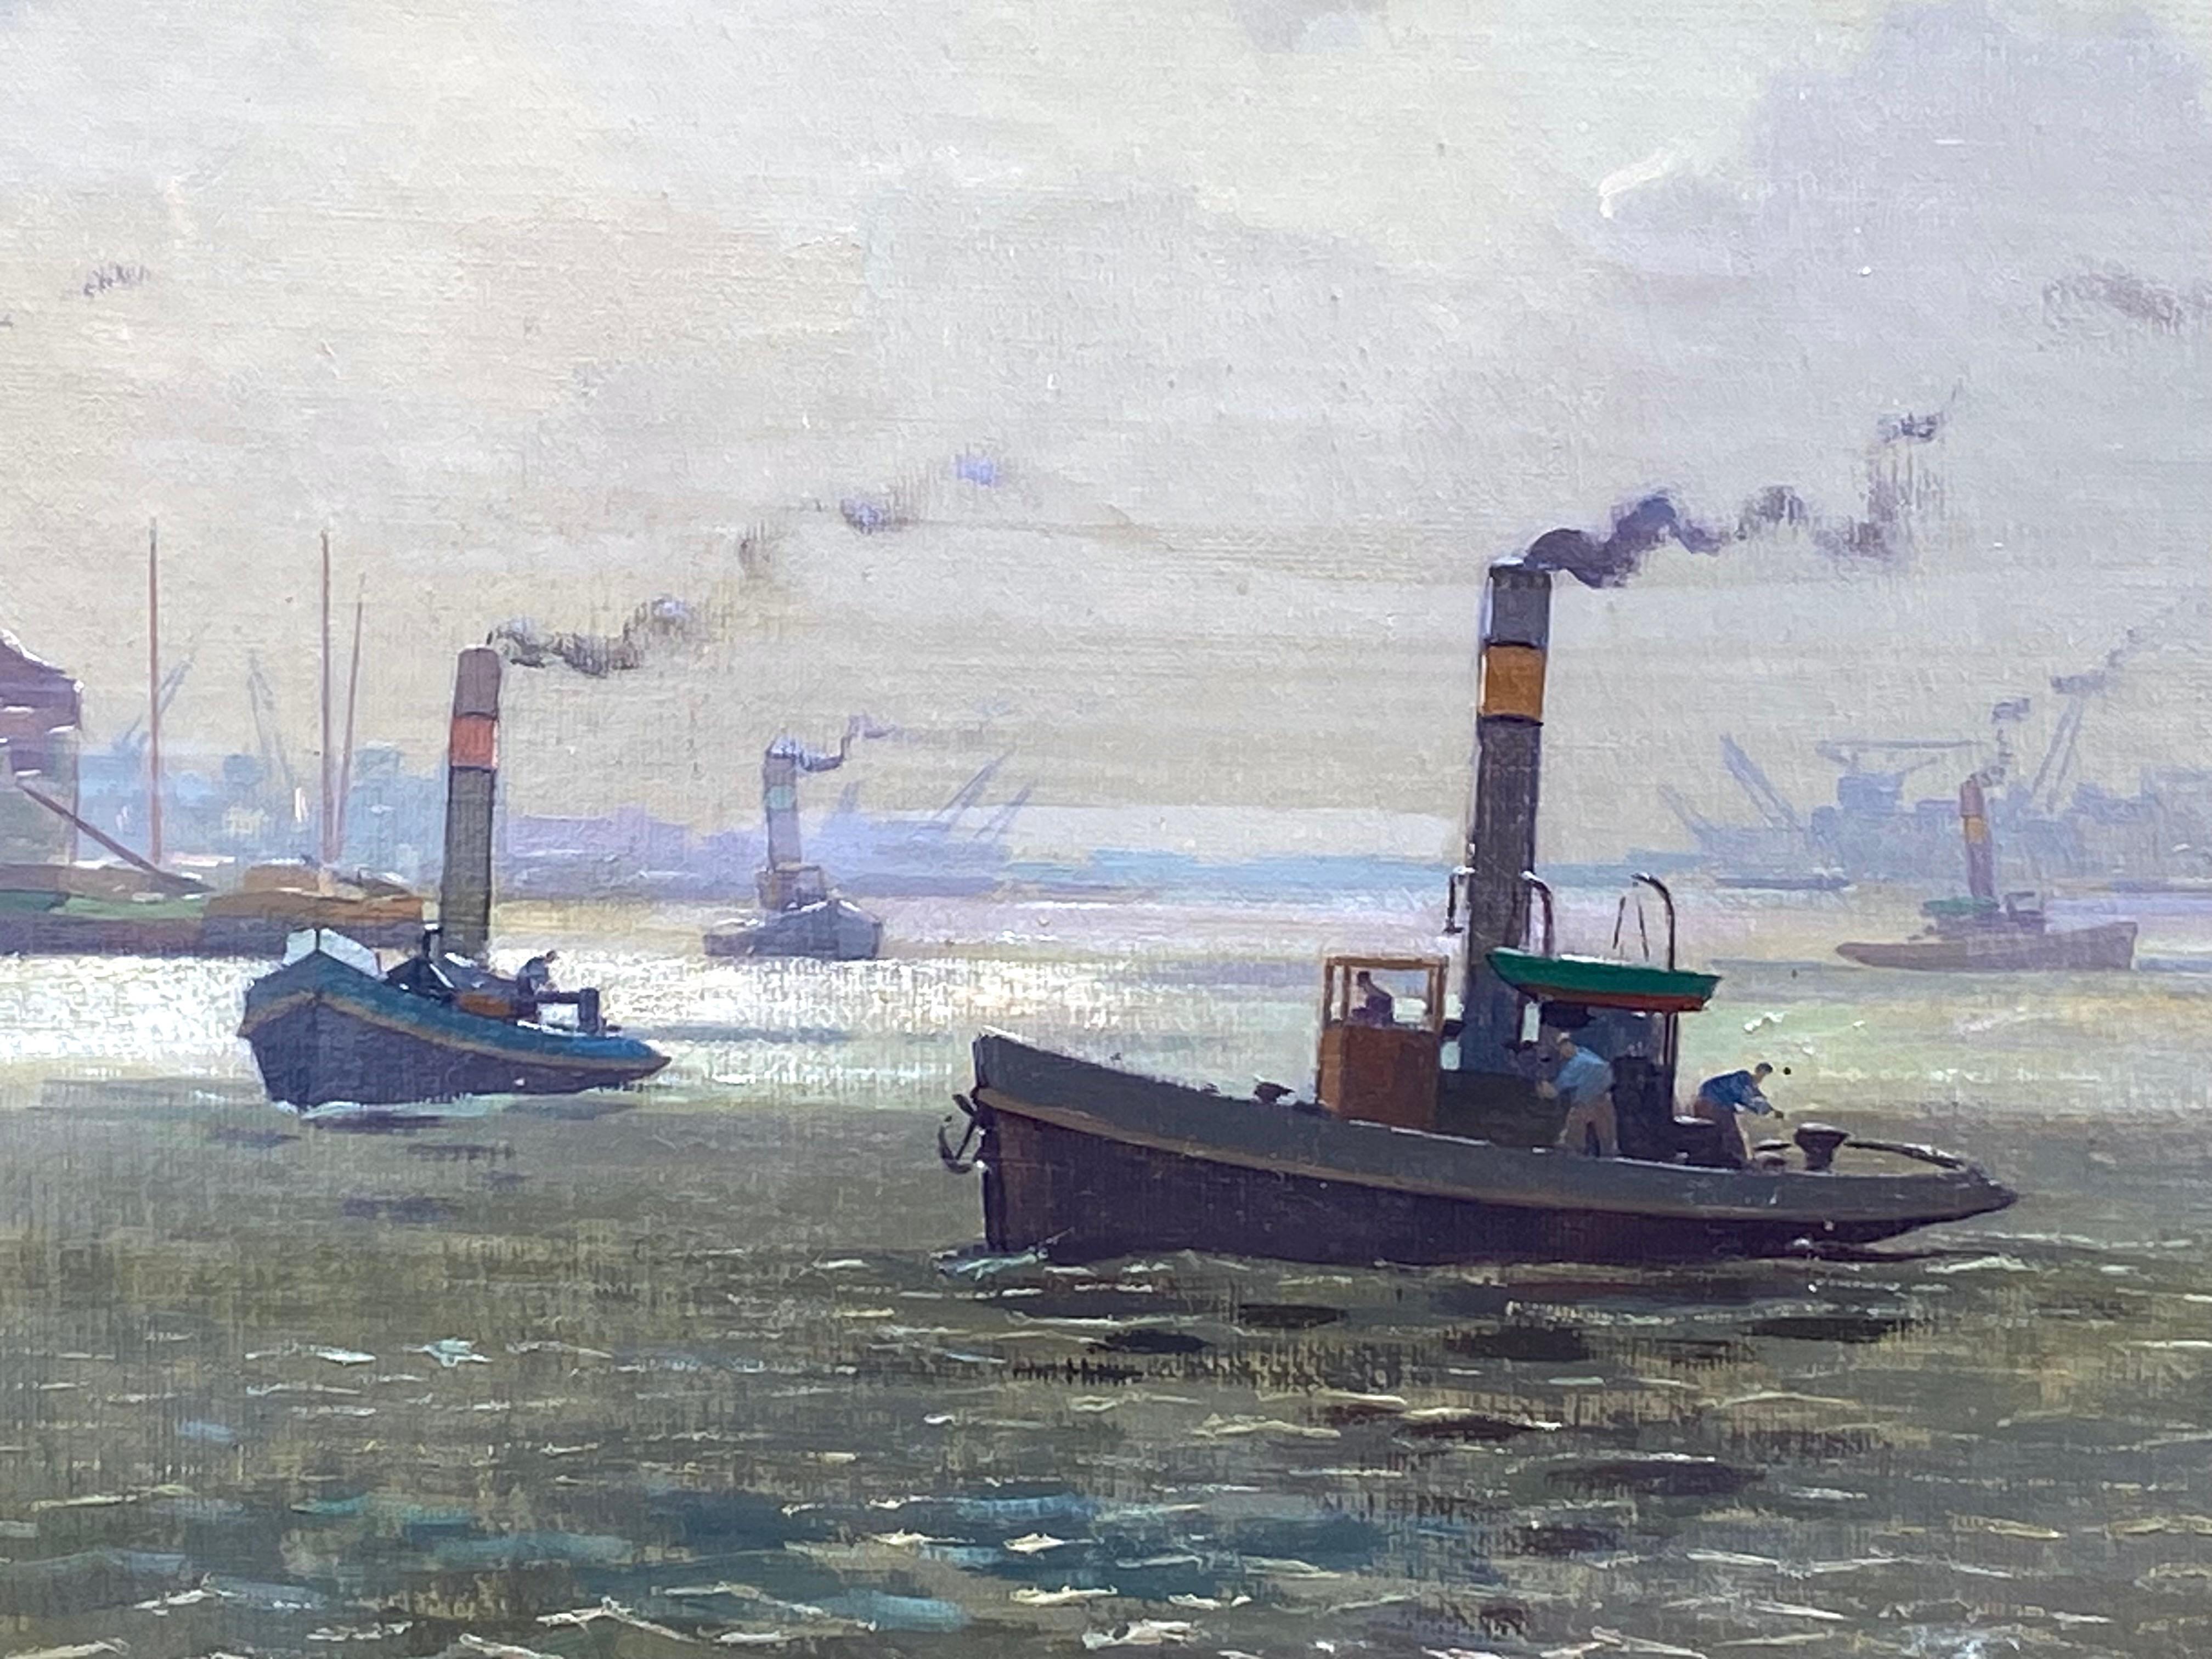 

This wonderful seaport painting is by Jan Simon Knikker Jr. (Dutch, 1911–1990). Knikker was a prolific painter of the Hague school. Judging by the subject and age of the canvas this wonderful depiction of an industrial dutch port is from the